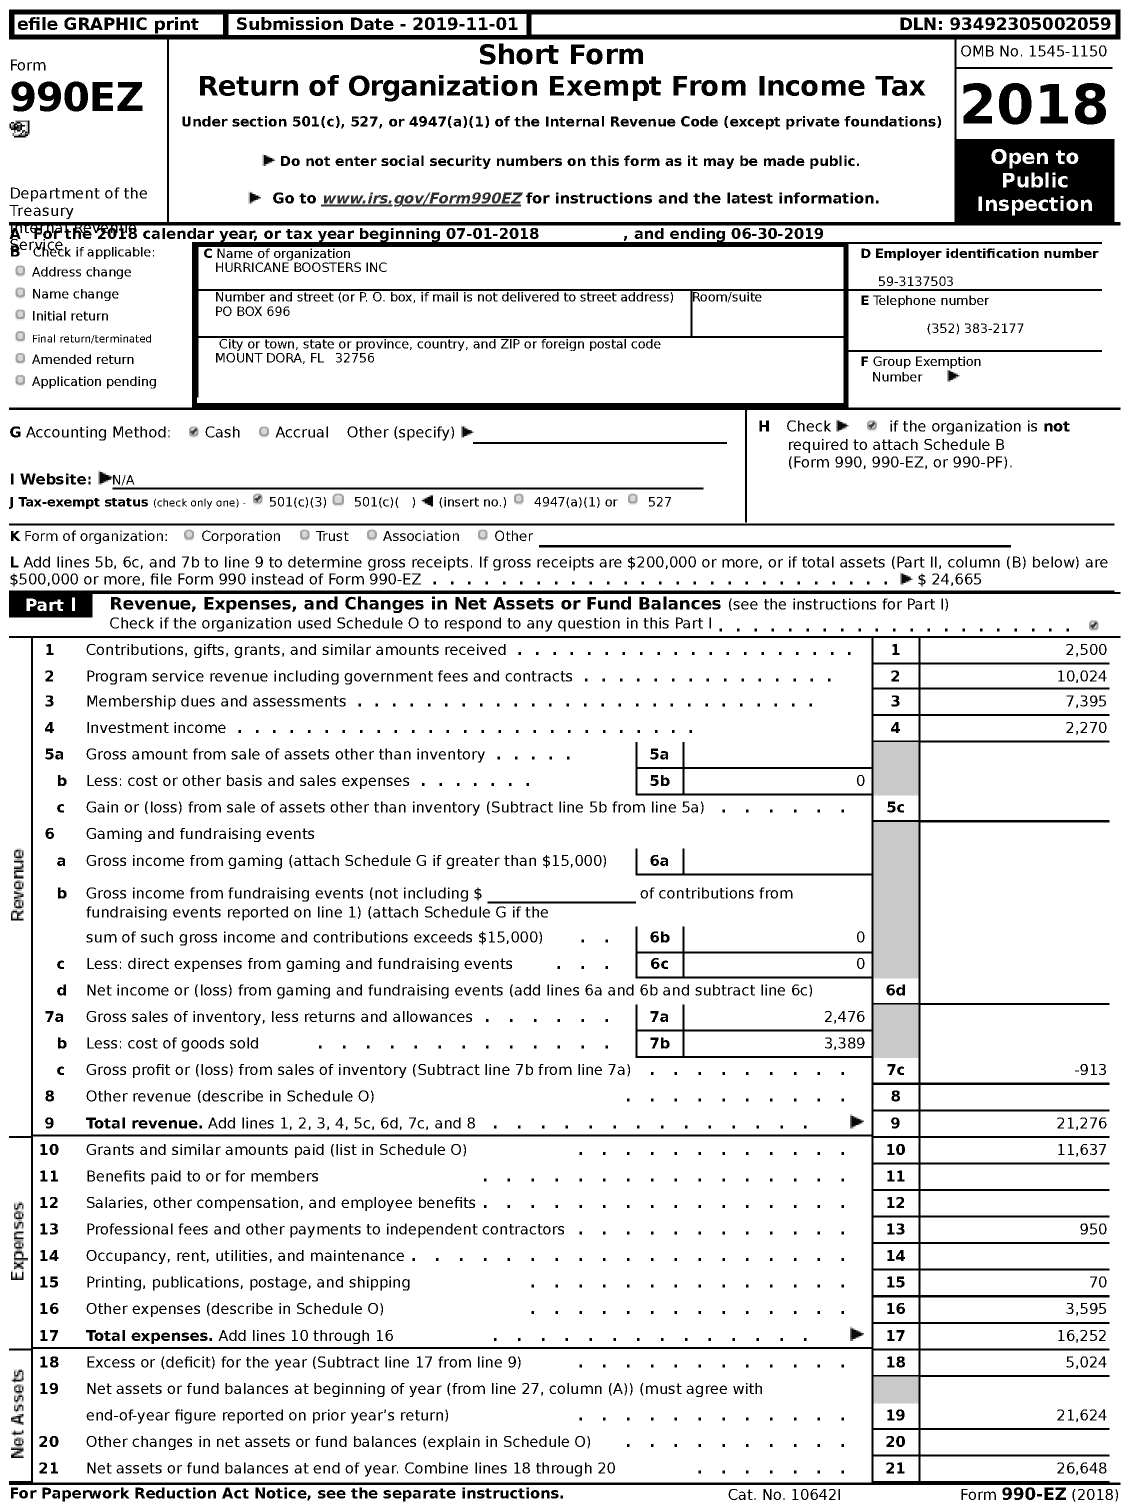 Image of first page of 2018 Form 990EZ for Hurricane Boosters